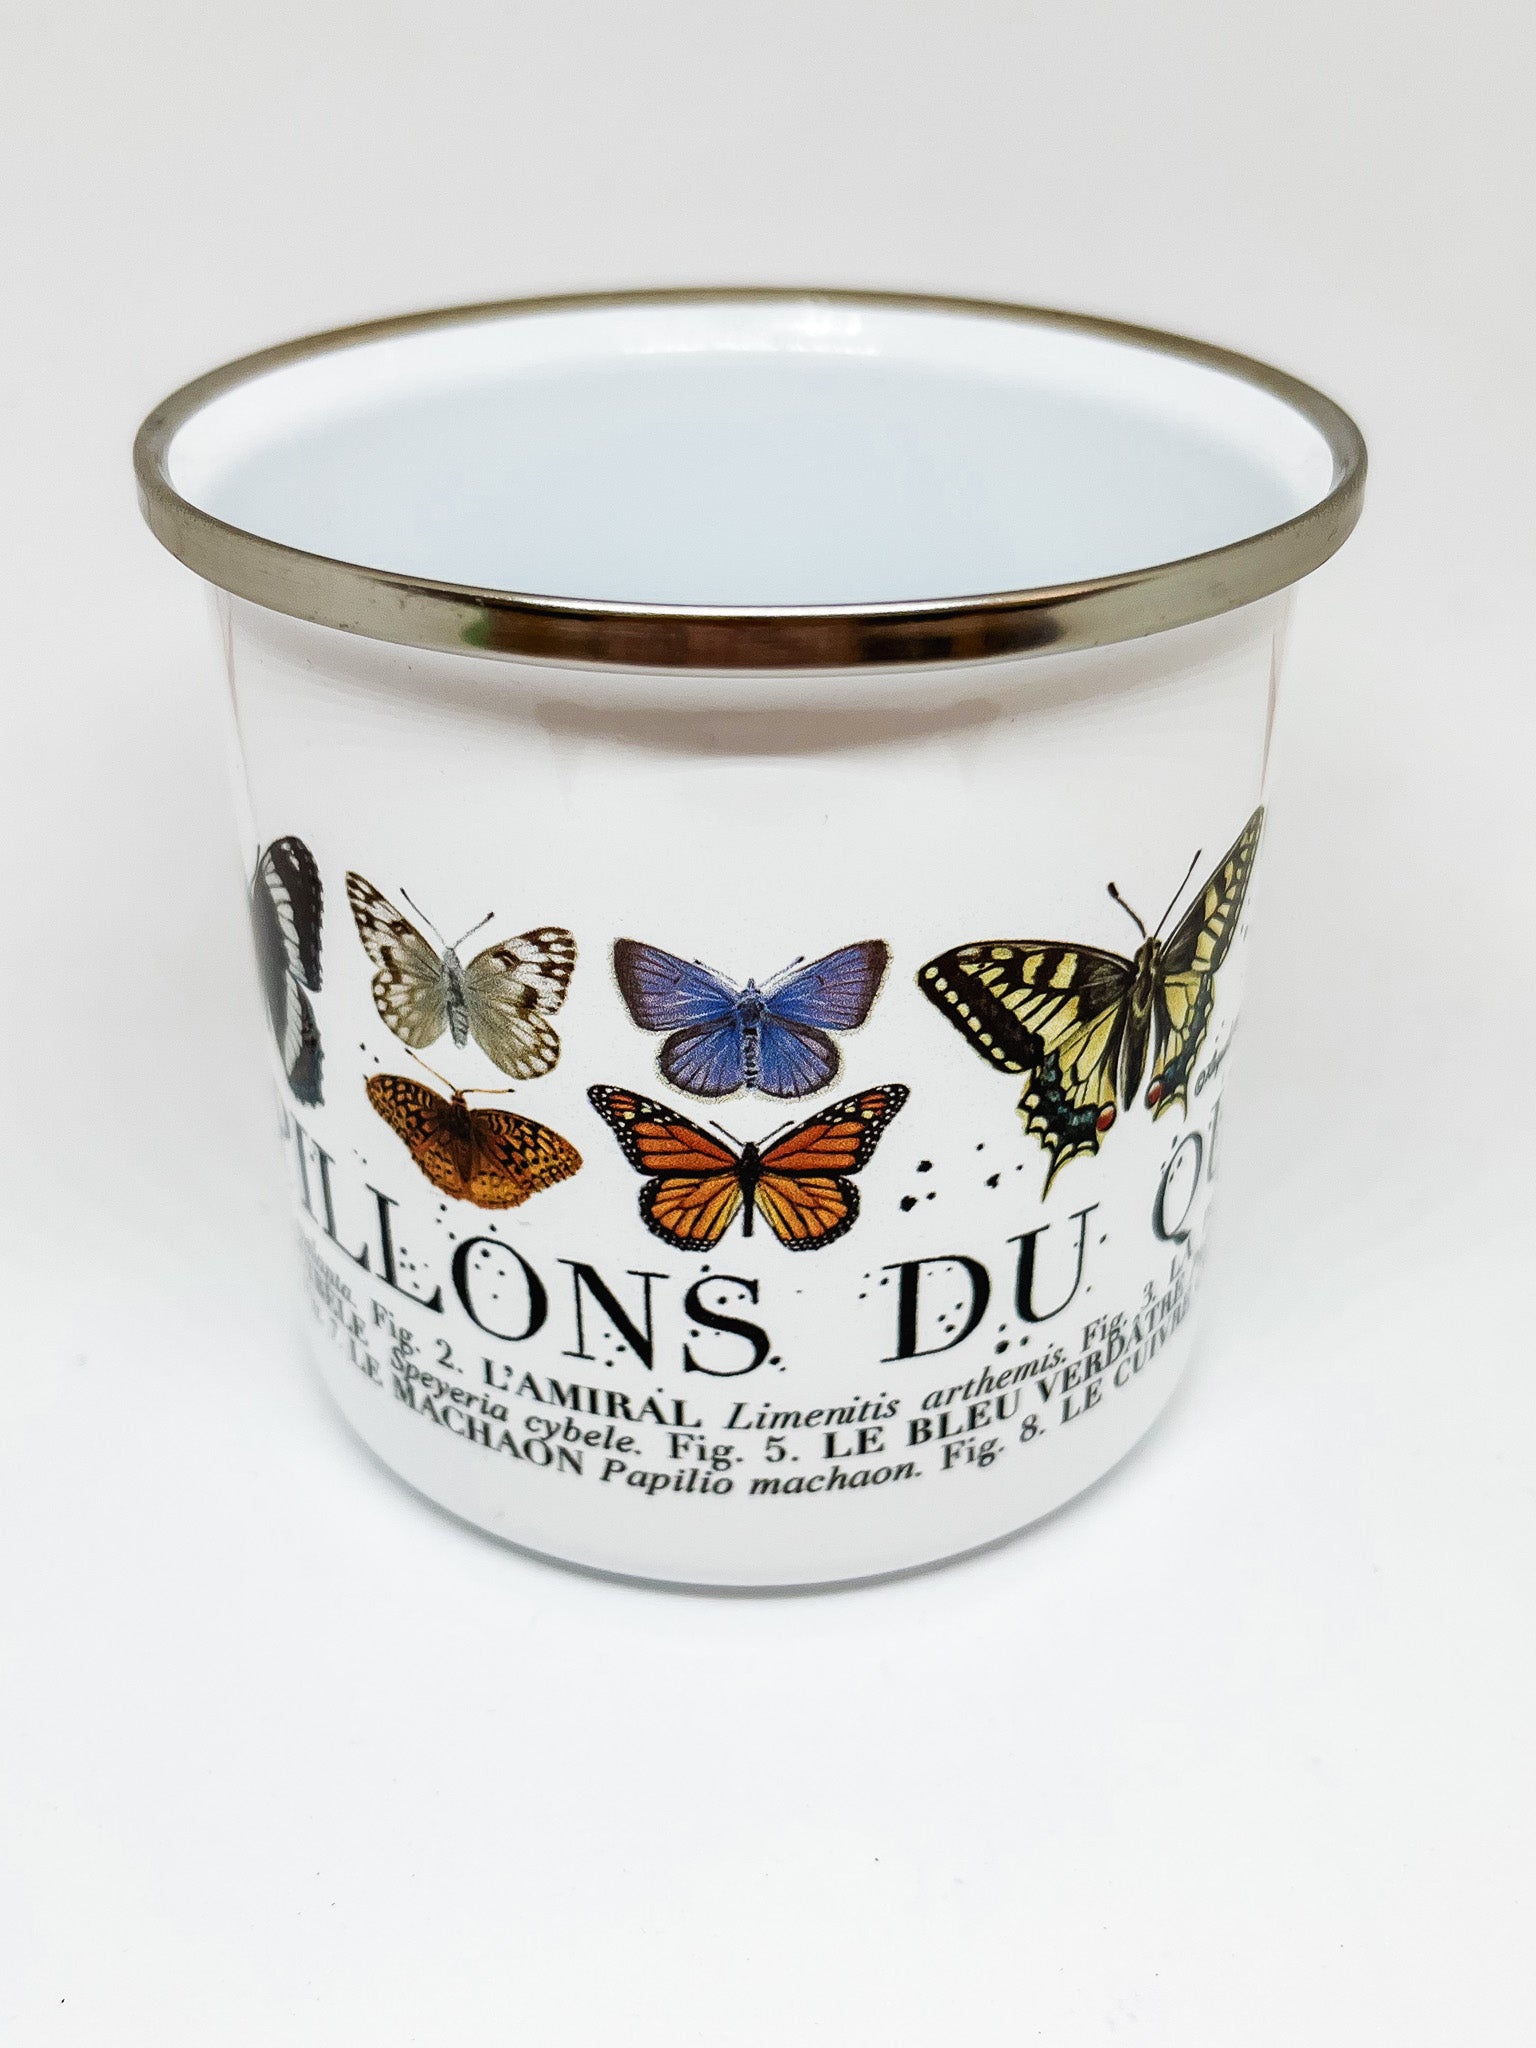 White enamel mug with silver rim and illustrations of butterflies with text below identifying each butterfly